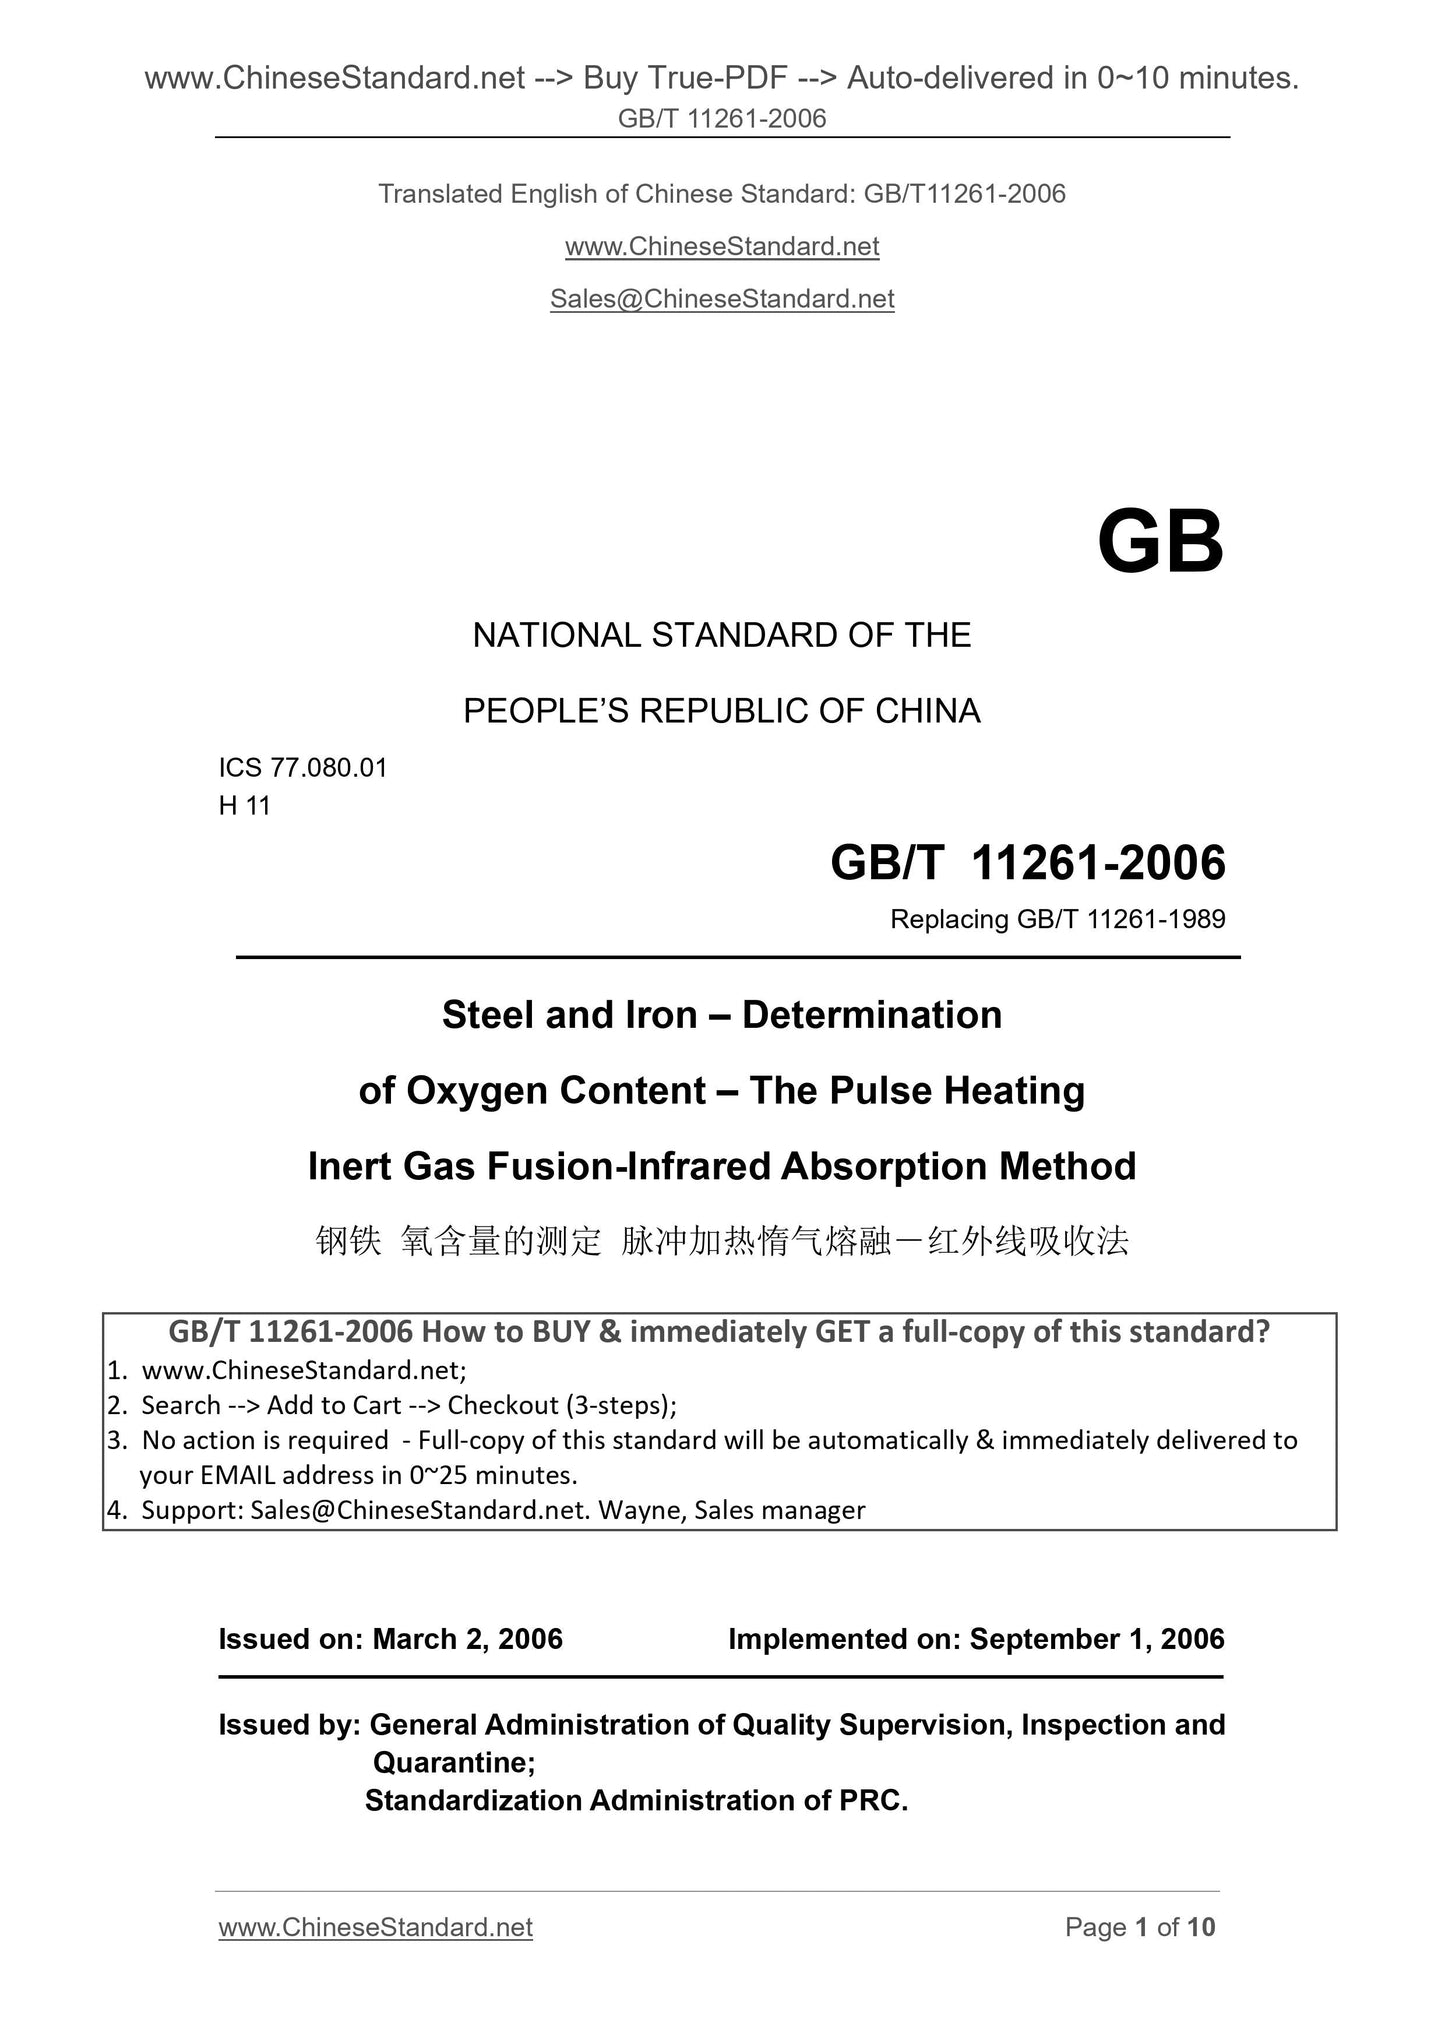 GB/T 11261-2006 Page 1